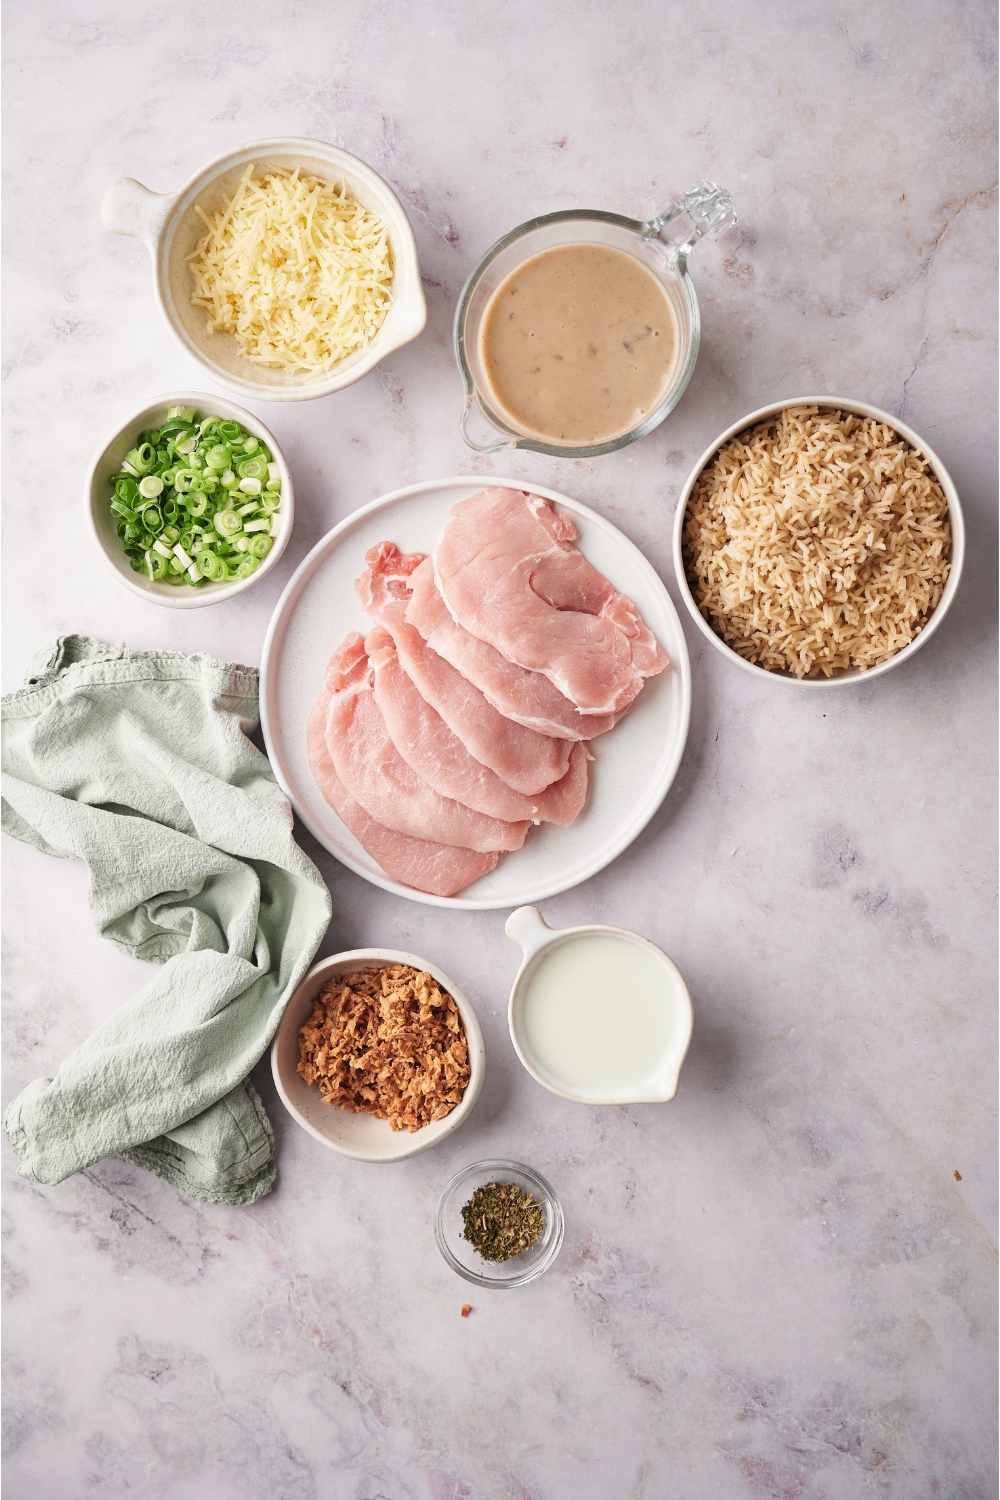 An assortment of ingredients including a plate of raw pork chops and bowls of cooked rice, soup, shredded cheese, green onion, sour cream, and seasonings.